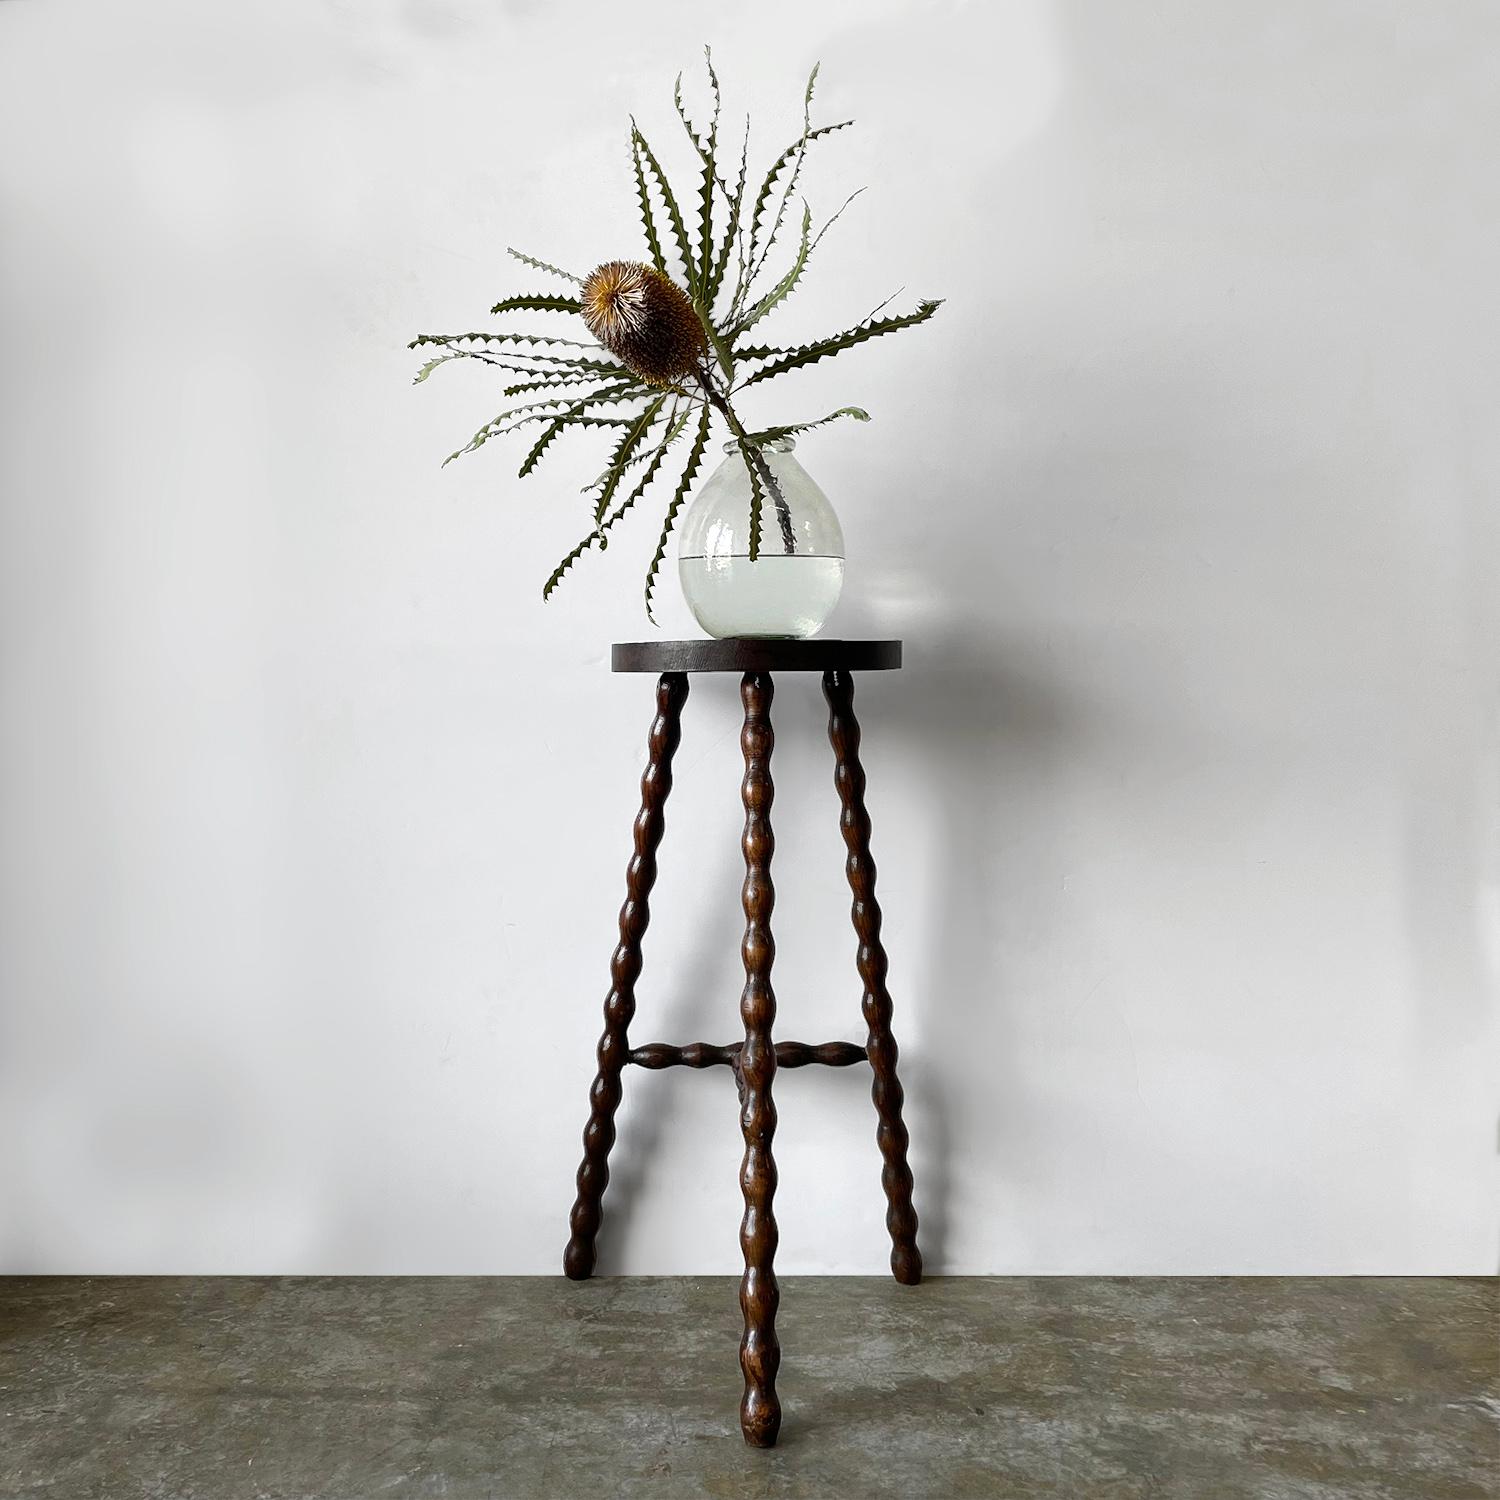 French half moon tripod stool
France, midcentury
Can be used as a stool or side table
Half moon seat with whimsical turned wood tripod legs
Original wood finish with lovely grain detail
Patina from age and use
This listing is for a single